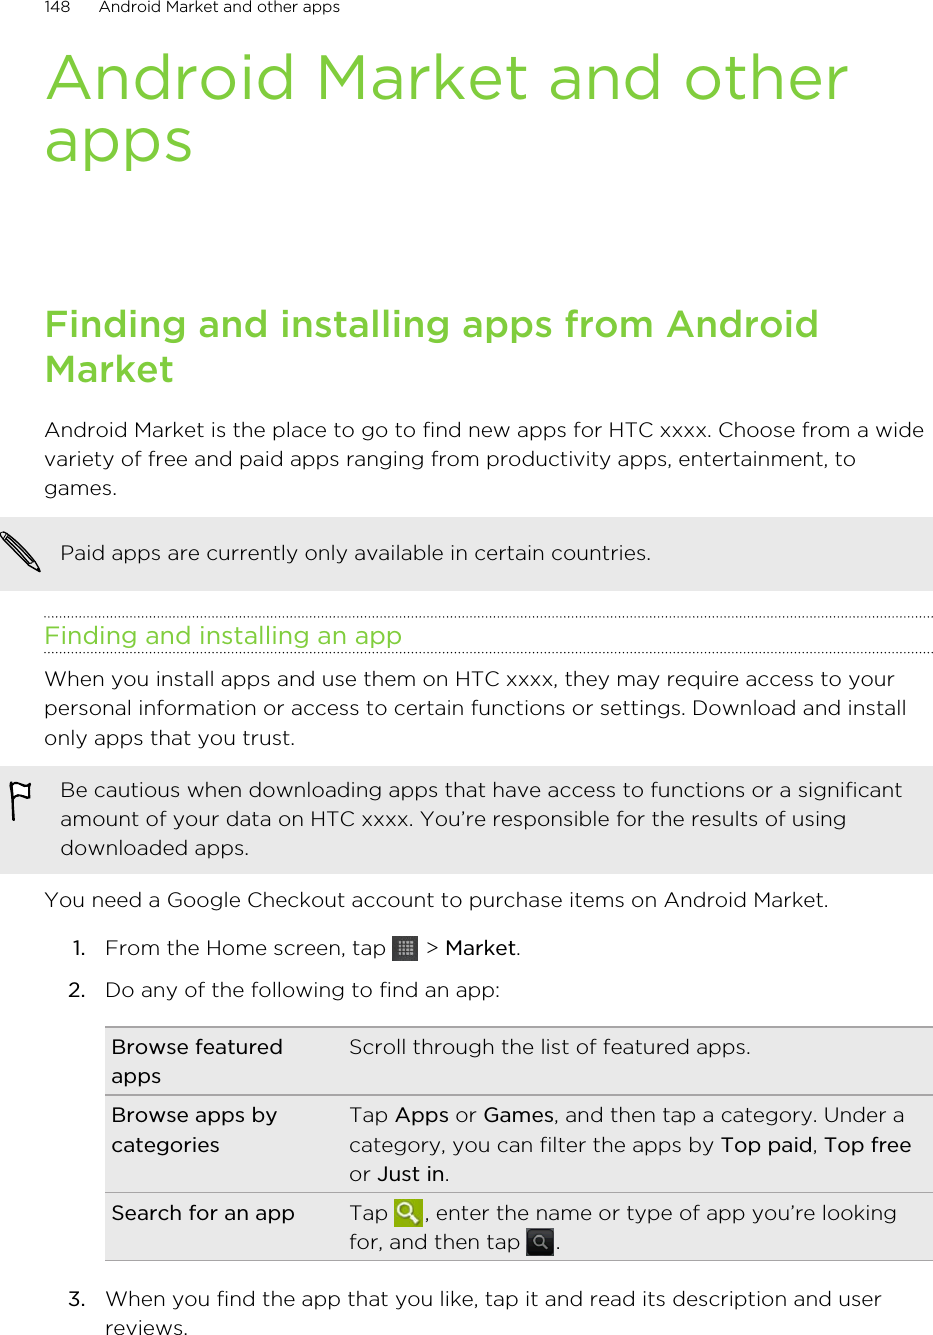 Android Market and otherappsFinding and installing apps from AndroidMarketAndroid Market is the place to go to find new apps for HTC xxxx. Choose from a widevariety of free and paid apps ranging from productivity apps, entertainment, togames.Paid apps are currently only available in certain countries.Finding and installing an appWhen you install apps and use them on HTC xxxx, they may require access to yourpersonal information or access to certain functions or settings. Download and installonly apps that you trust.Be cautious when downloading apps that have access to functions or a significantamount of your data on HTC xxxx. You’re responsible for the results of usingdownloaded apps.You need a Google Checkout account to purchase items on Android Market.1. From the Home screen, tap   &gt; Market.2. Do any of the following to find an app:Browse featuredappsScroll through the list of featured apps.Browse apps bycategoriesTap Apps or Games, and then tap a category. Under acategory, you can filter the apps by Top paid, Top freeor Just in.Search for an app Tap  , enter the name or type of app you’re lookingfor, and then tap  .3. When you find the app that you like, tap it and read its description and userreviews.148 Android Market and other apps